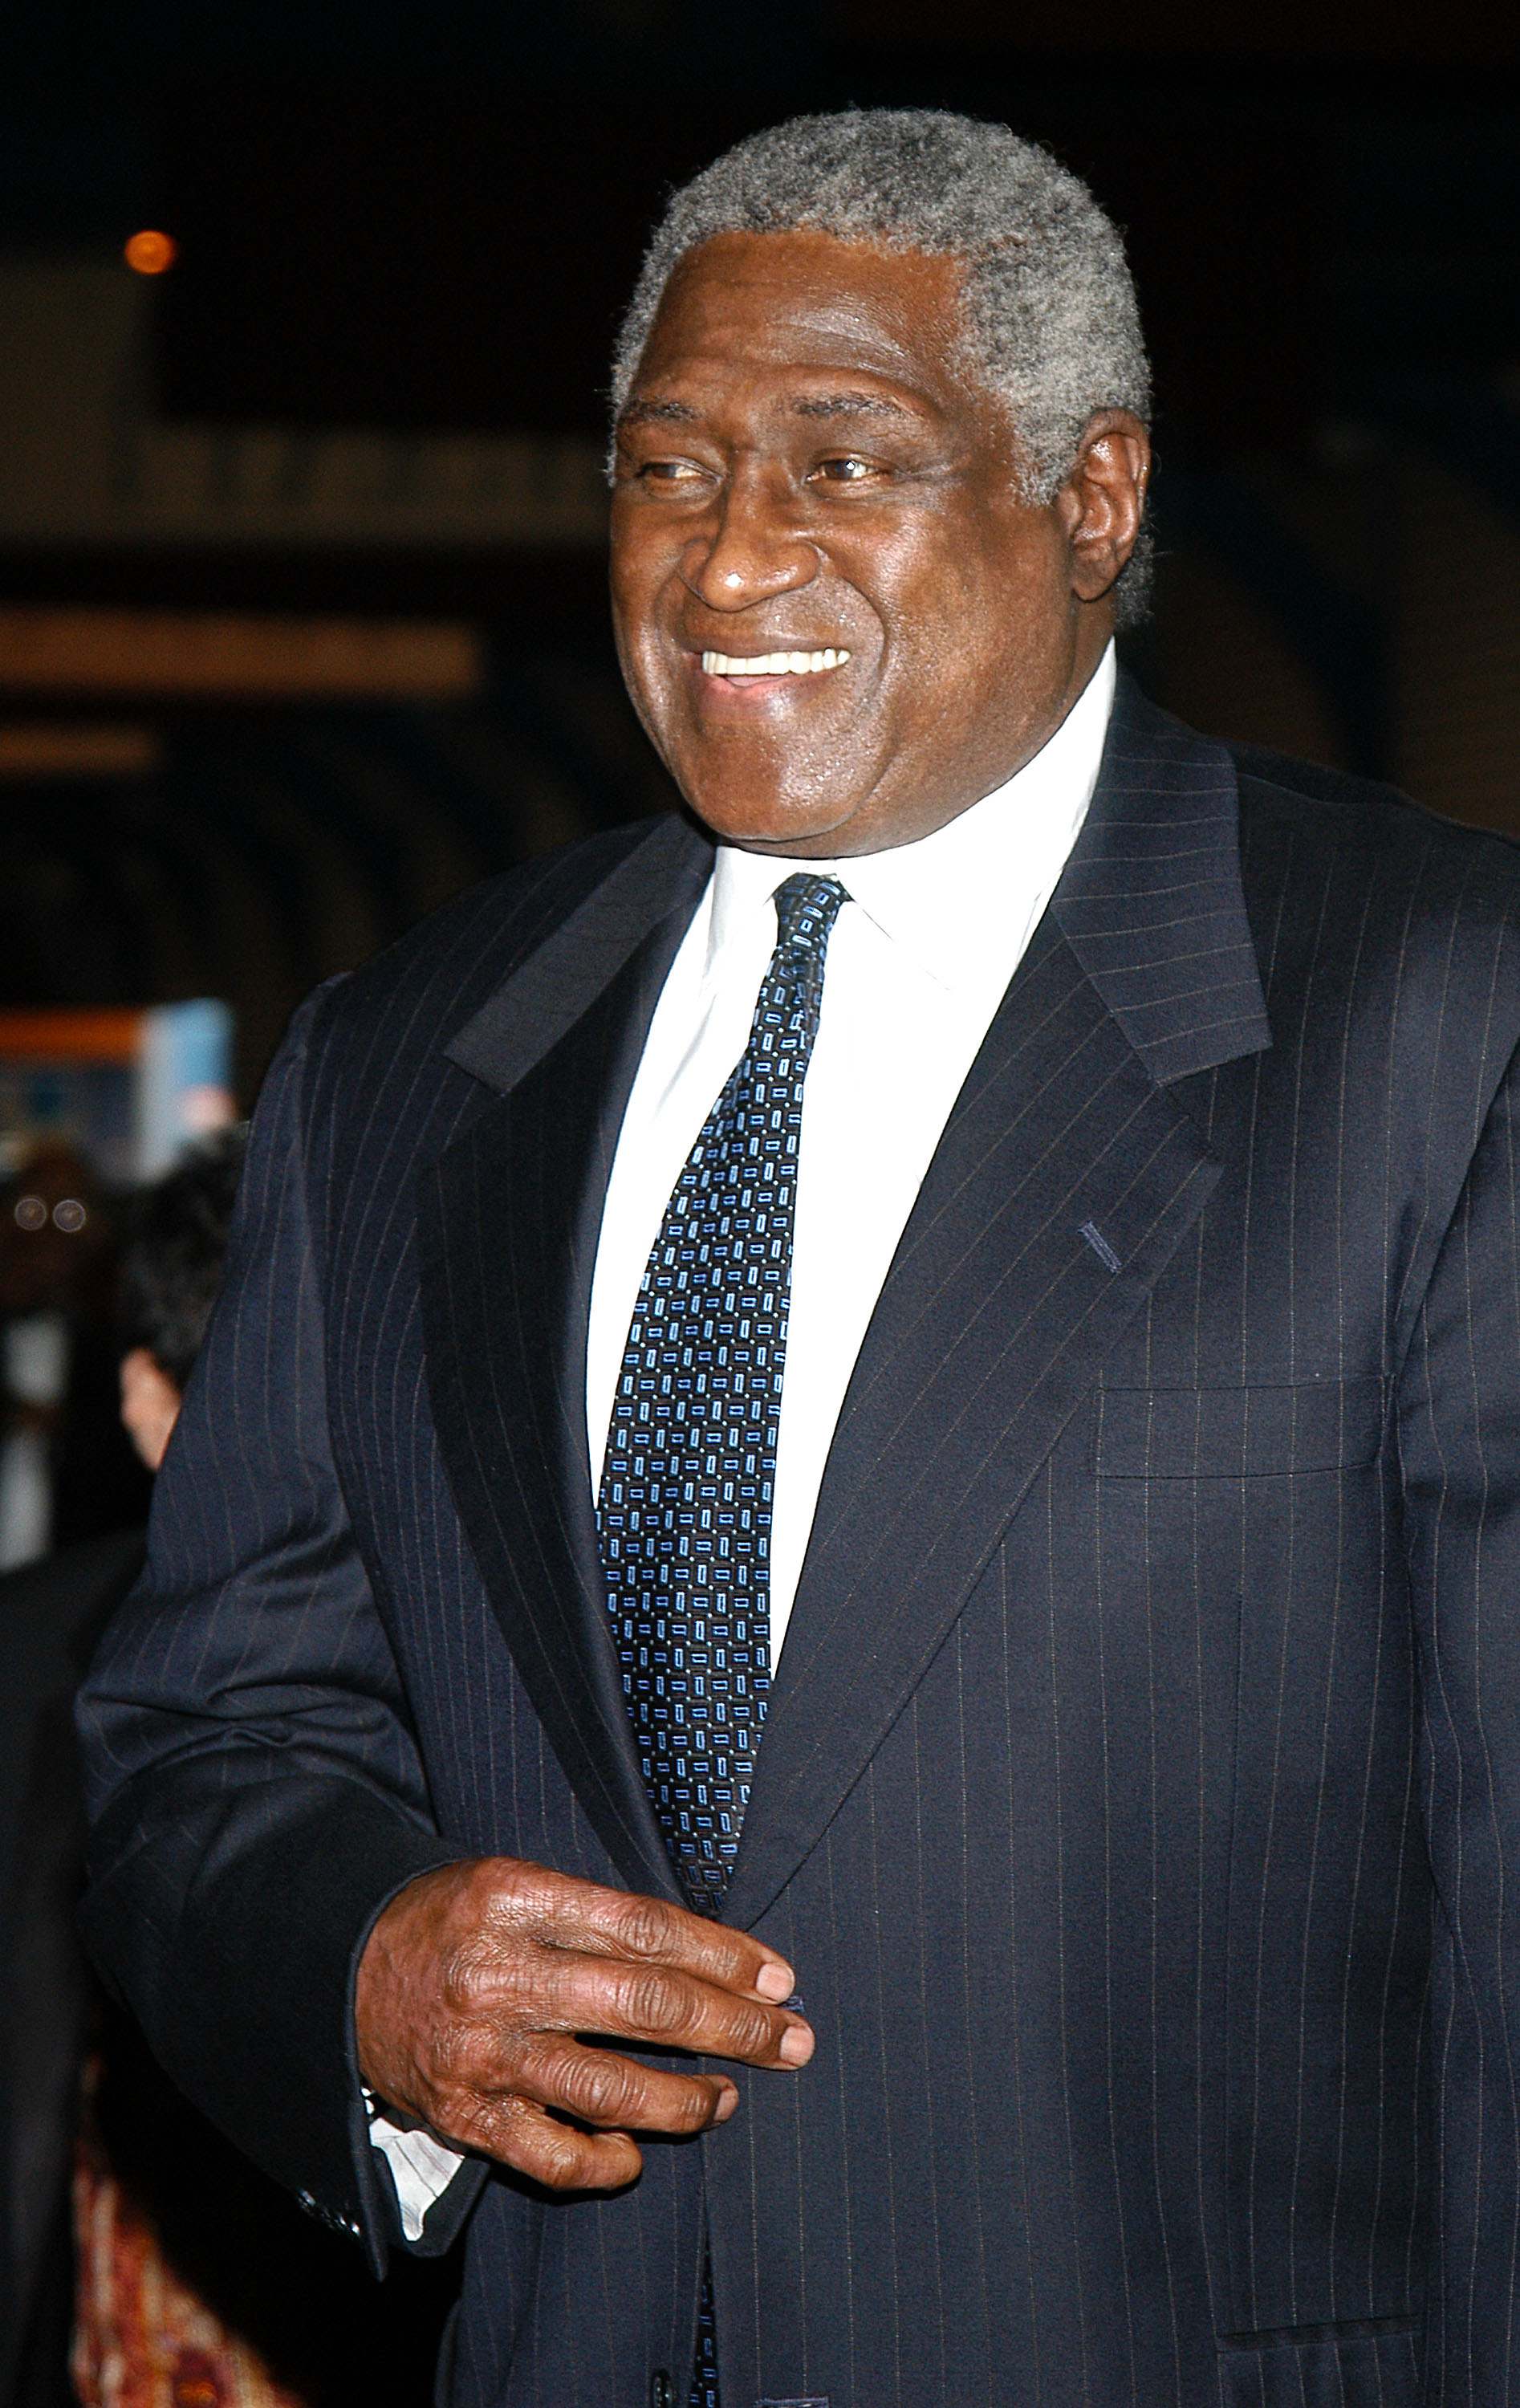 NEW YORK - APRIL 29:  Former New York Knicks coach Willis Reed arrives at the 10th Annual Arthur Ashe Institute For Urban Health SportBall And Awards April 29, 2004 in New York City.  (Photo by Bryan Bedder/Getty Images)